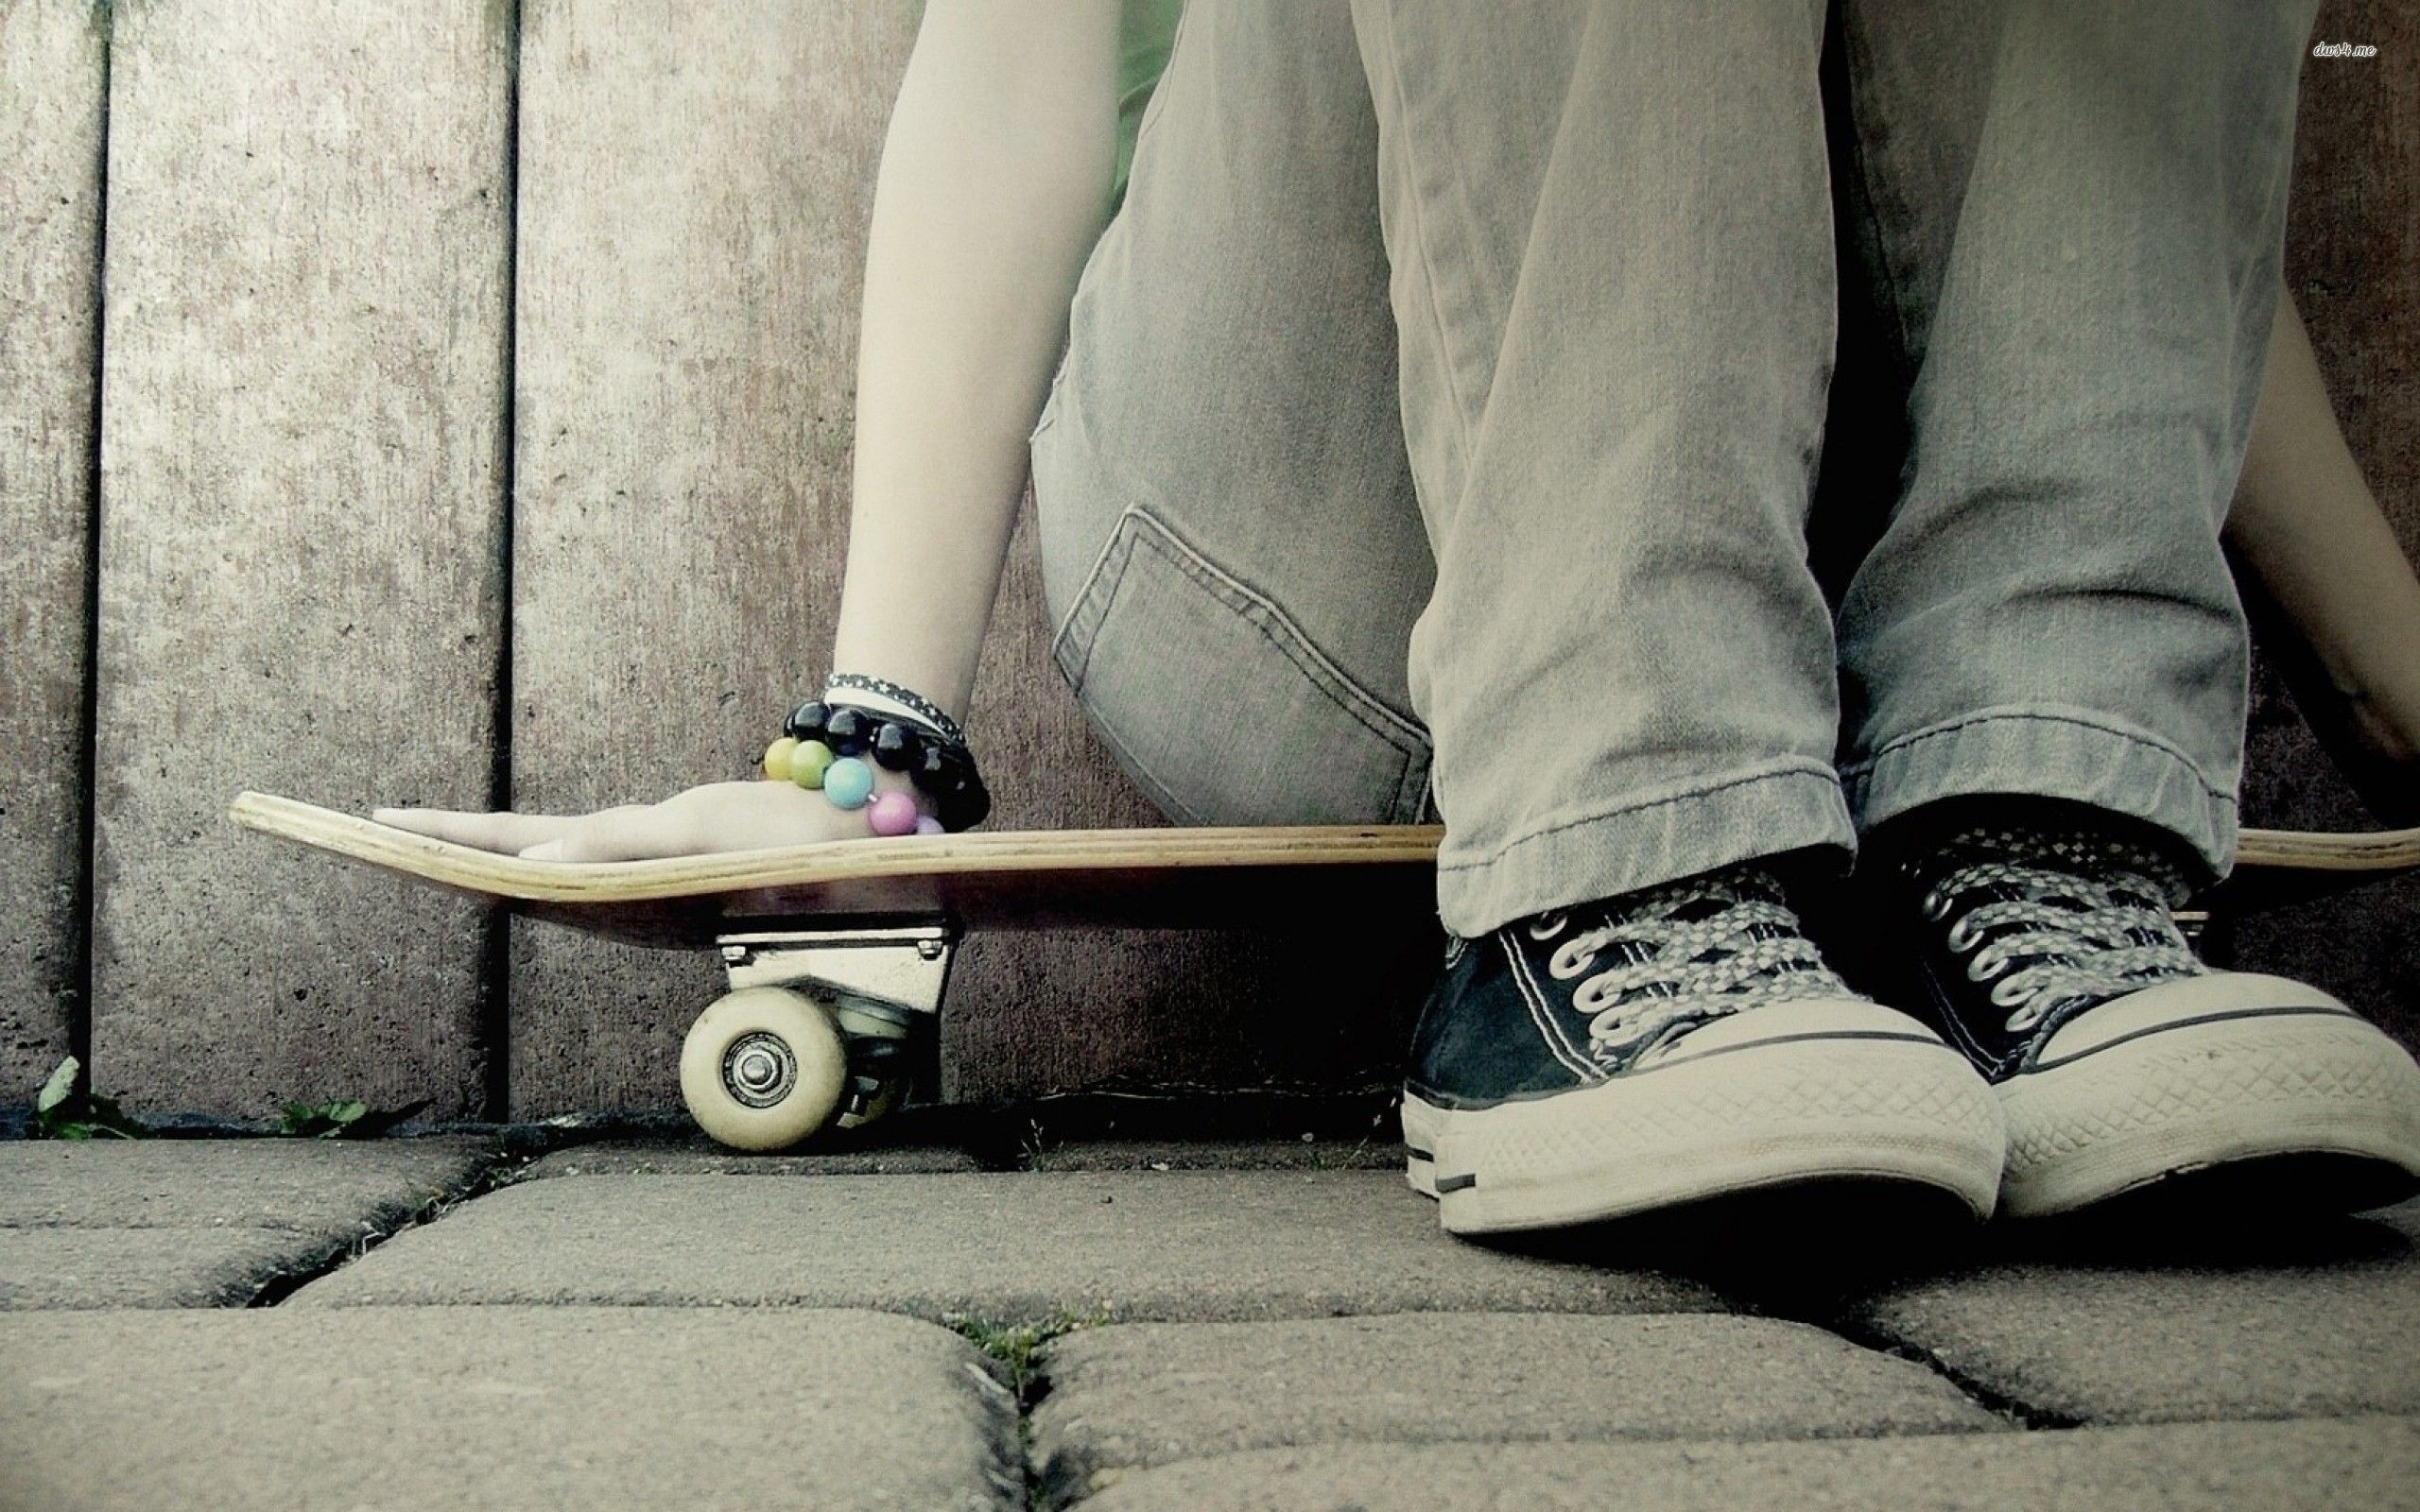 Sitting on a skateboard wallpaper - Photography wallpapers - #16633